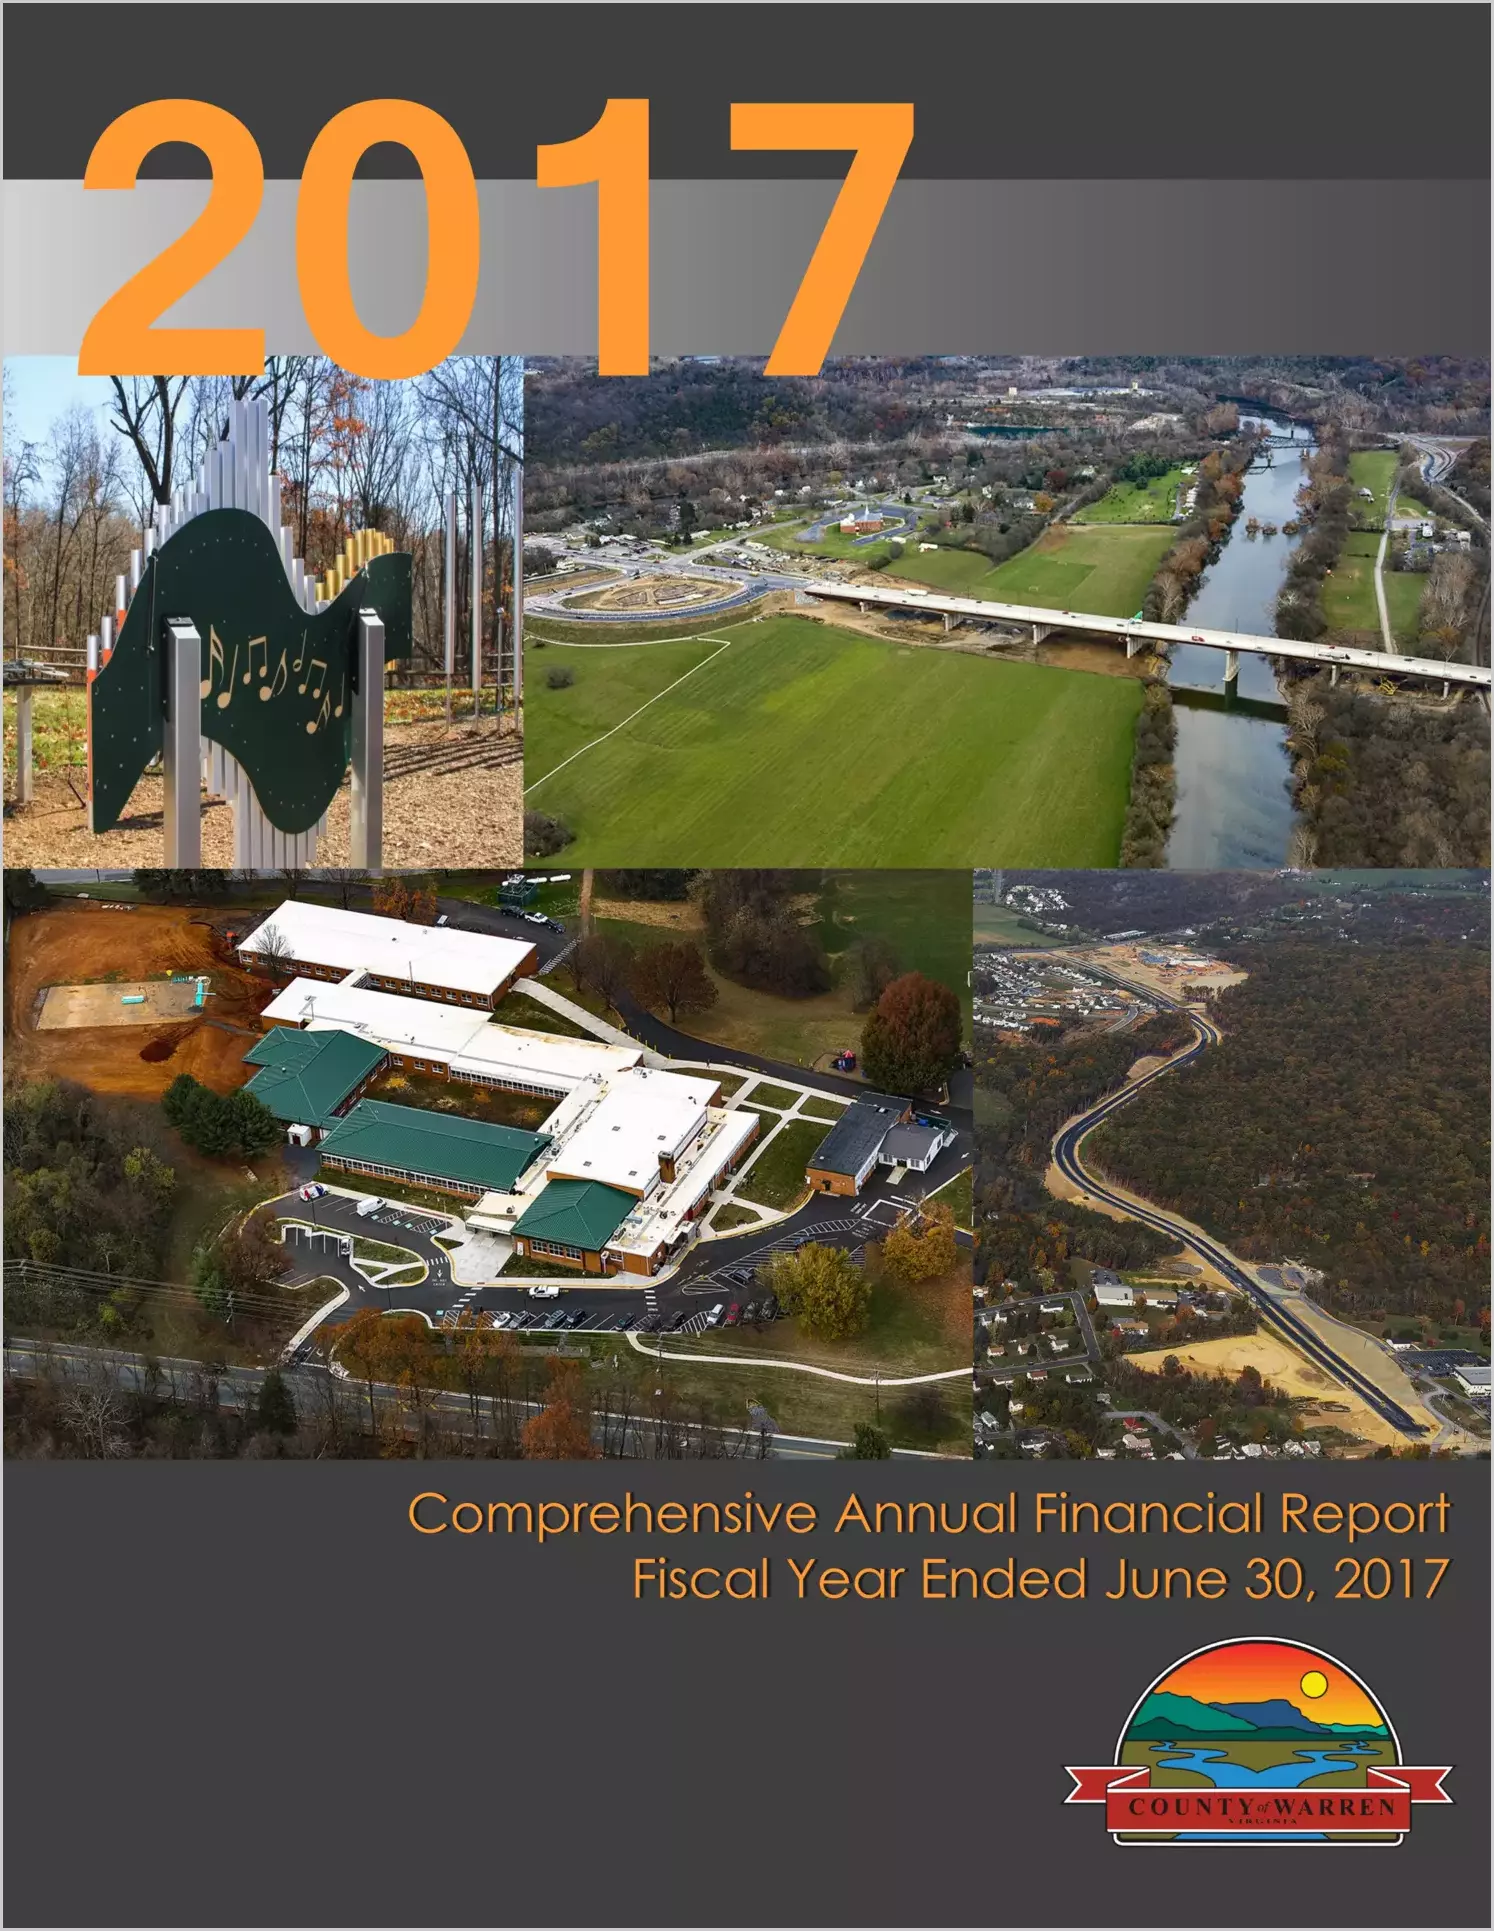 2017 Annual Financial Report for County of Warren